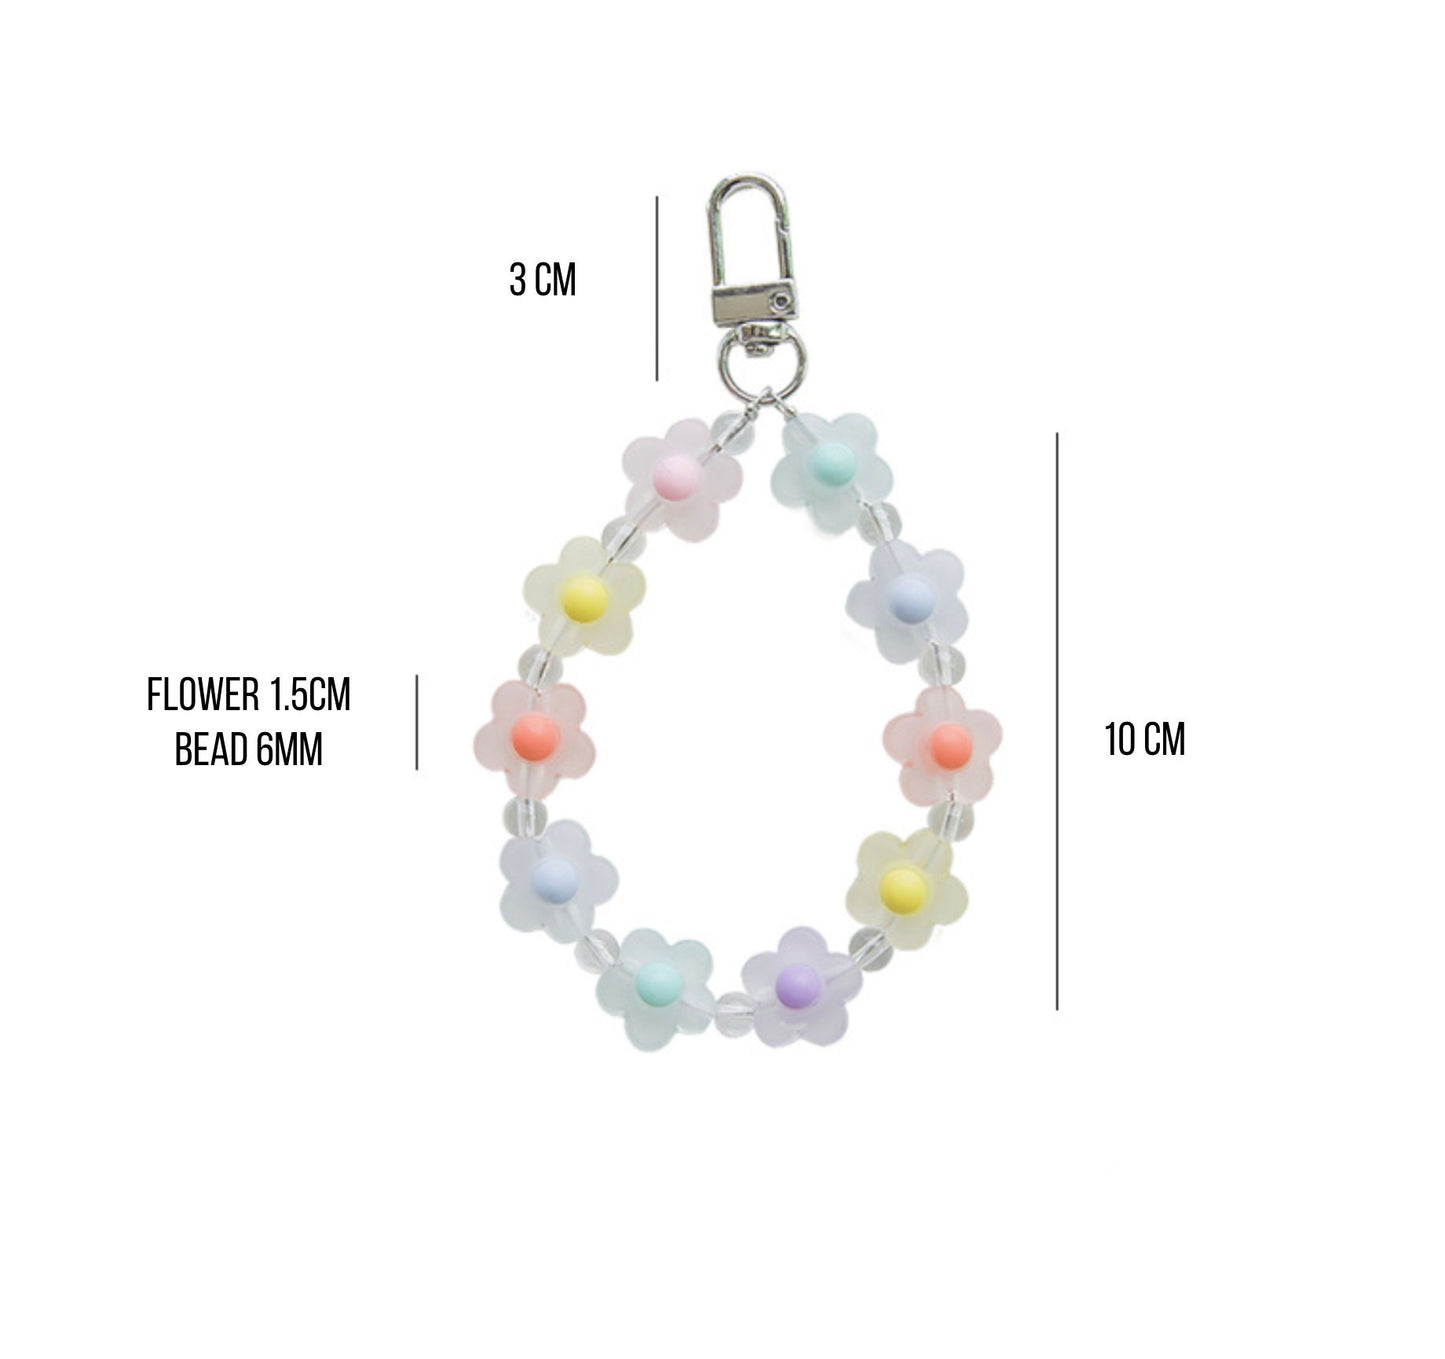 Cute Matte Frosted Flower Crown Themed Keychain, Keyring, Lanyard, Phone Accessories